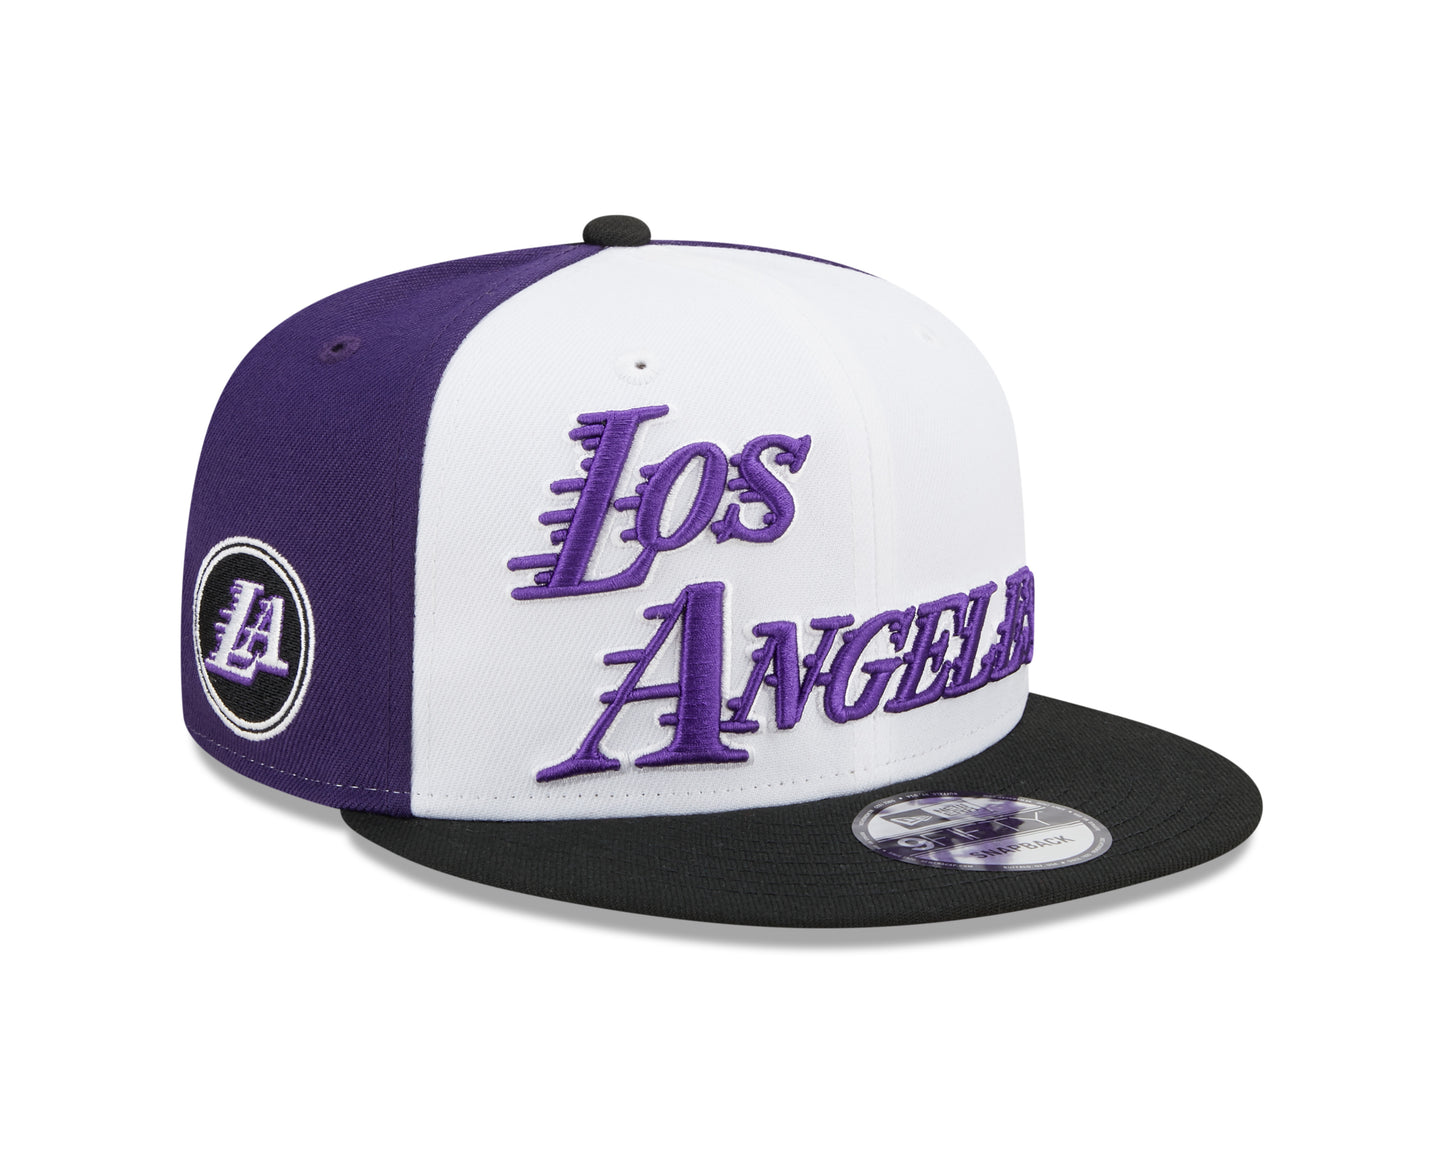 Los Angeles Lakers New Era City Edition 9FIFTY Snap Back Hat - White/Purple